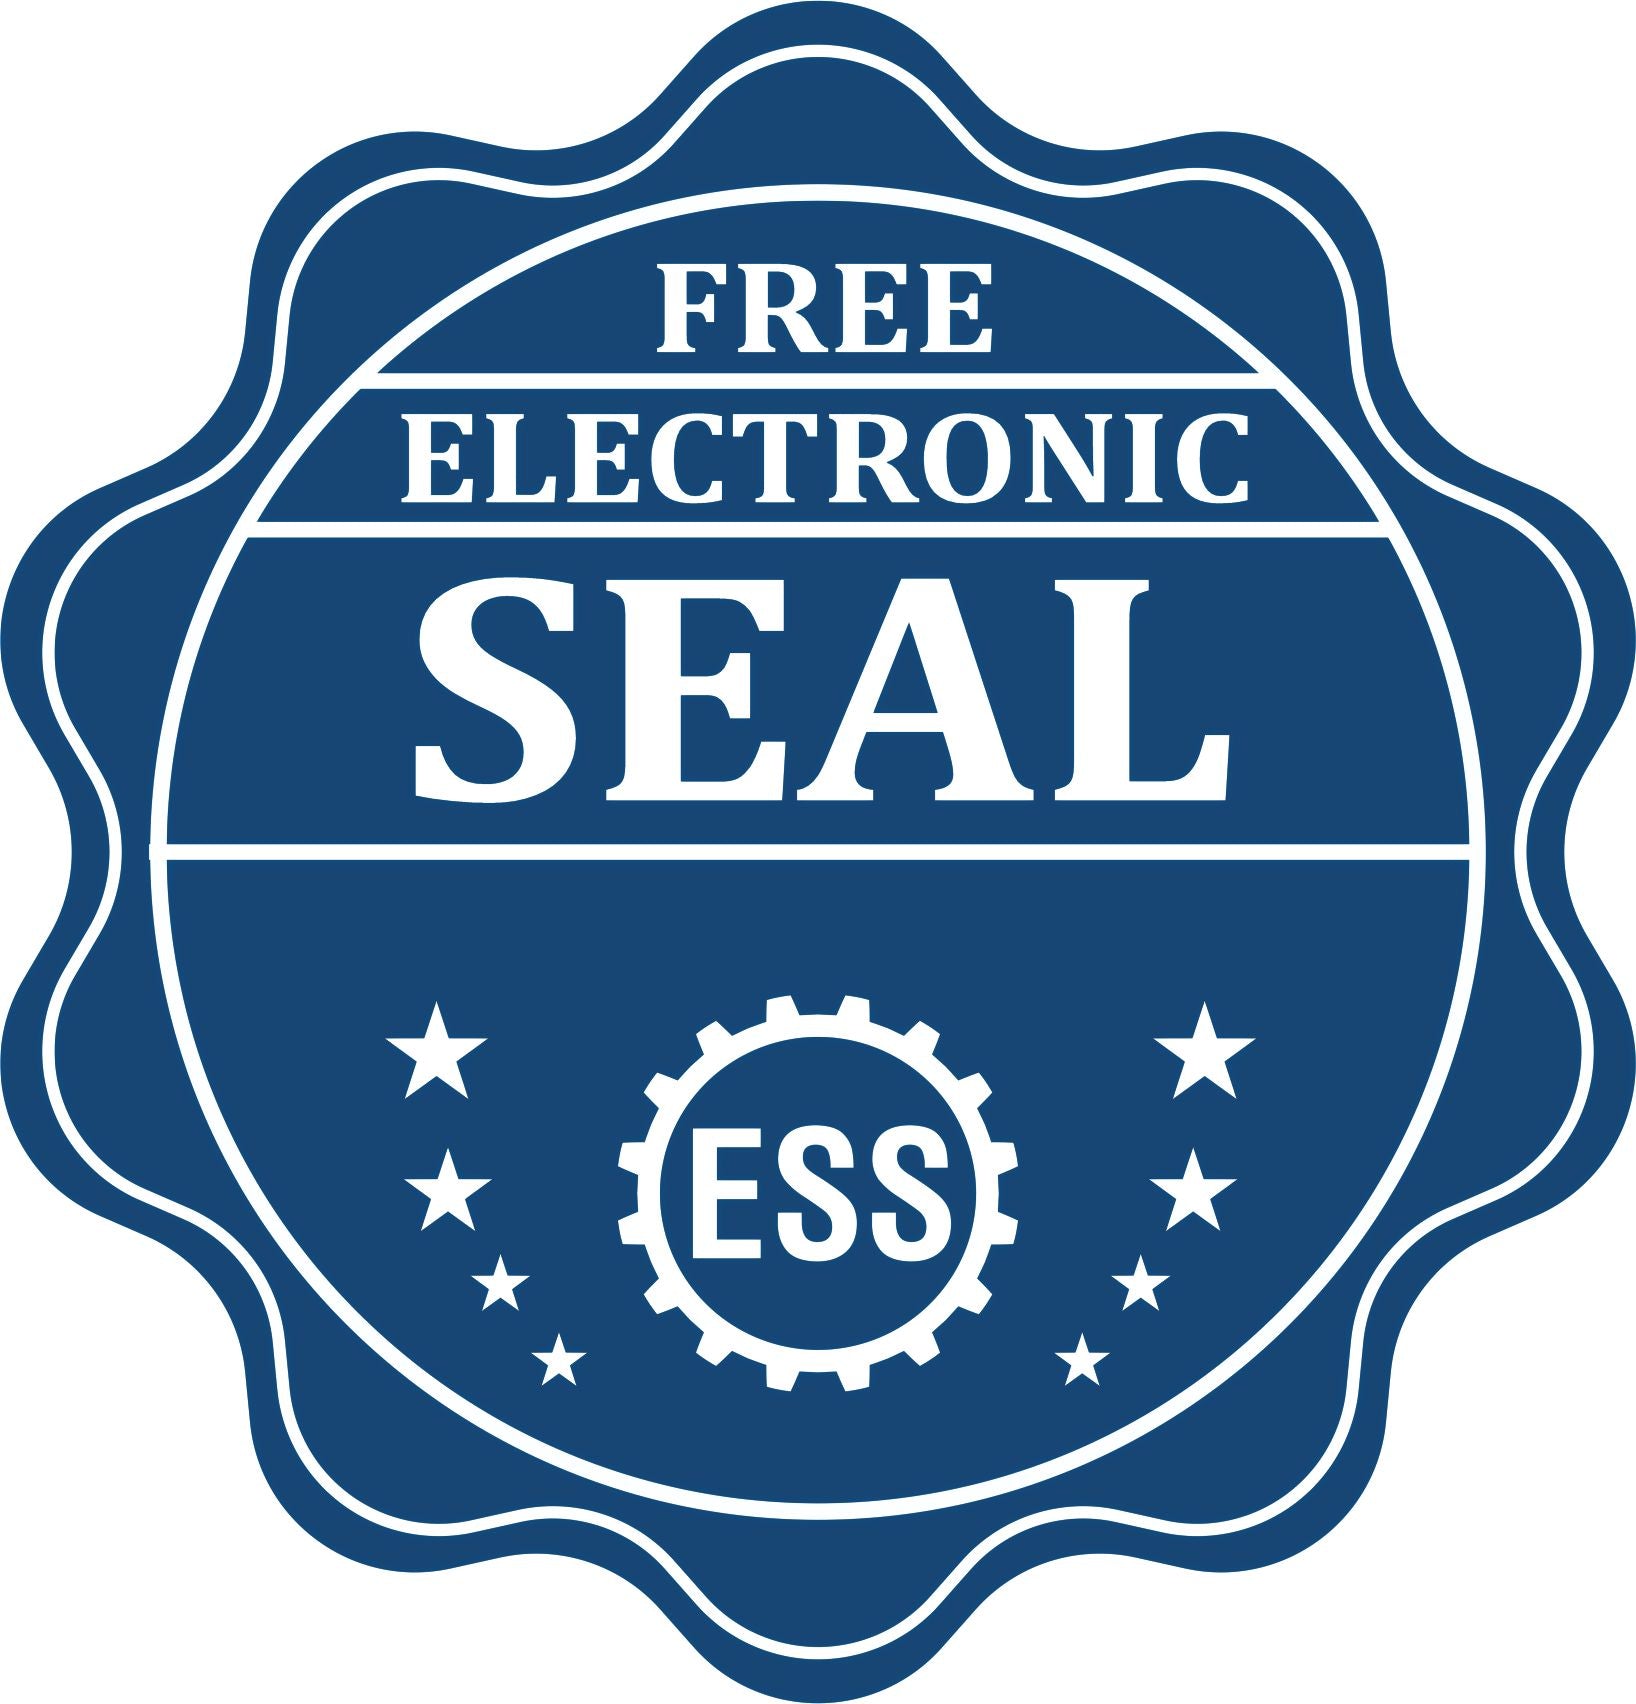 A badge showing a free electronic seal for the Heavy Duty Cast Iron Iowa Engineer Seal Embosser with stars and the ESS gear on the emblem.